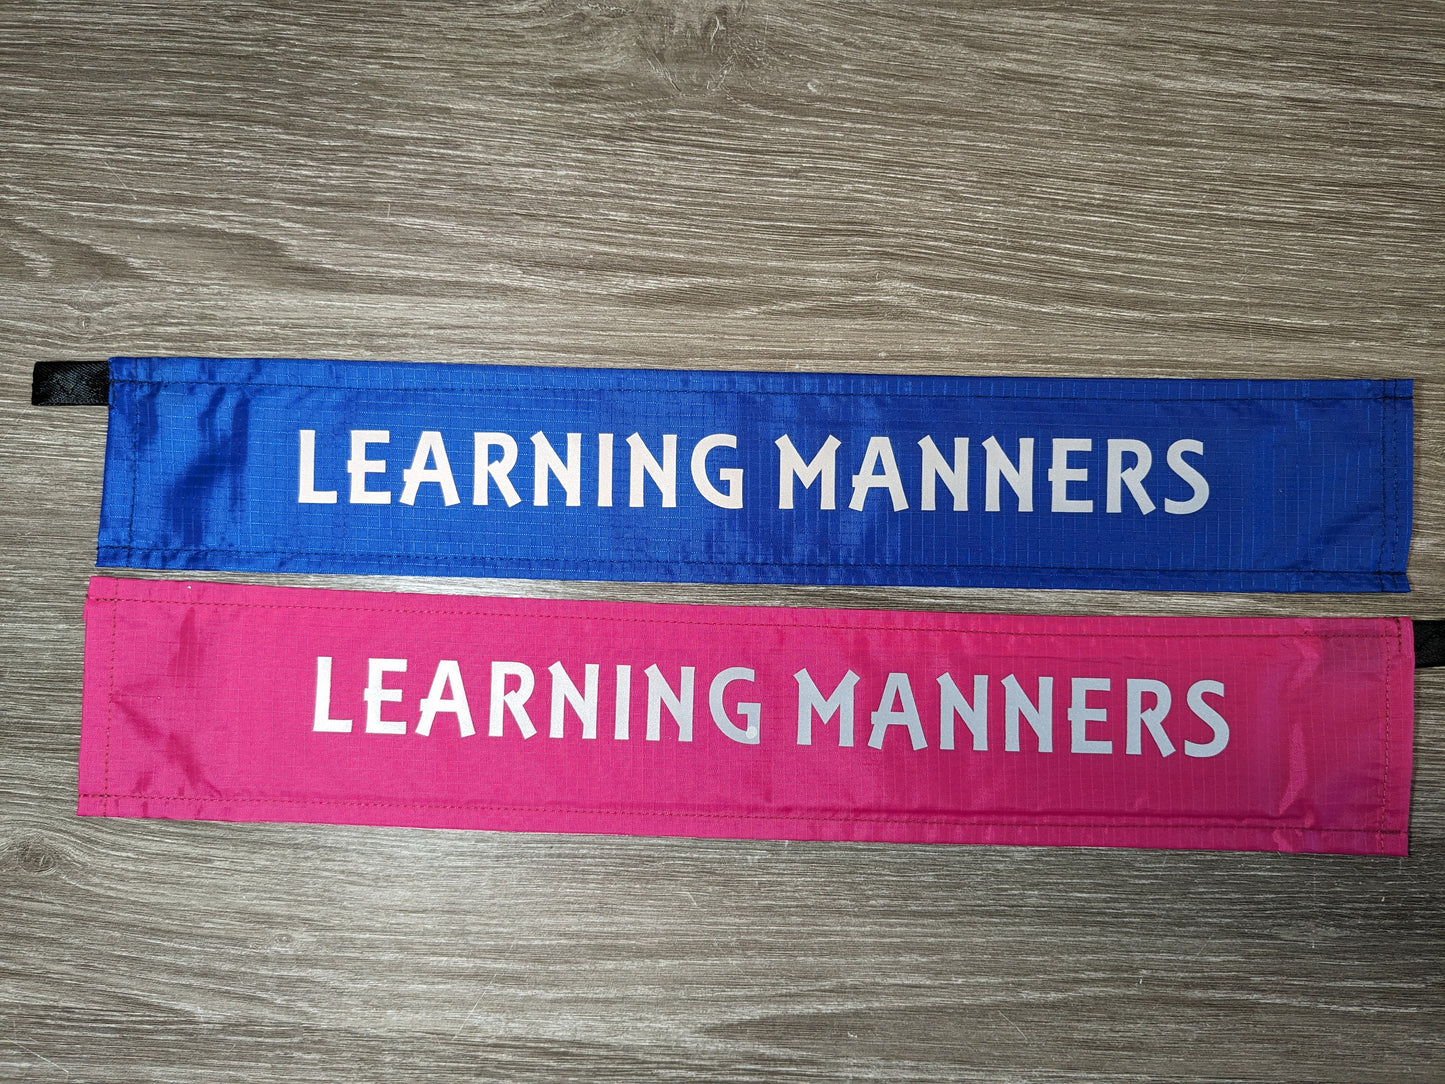 "LEARNING MANNERS" Dog lead sleeve / cover for dog leash - canine training - puppy socialising.